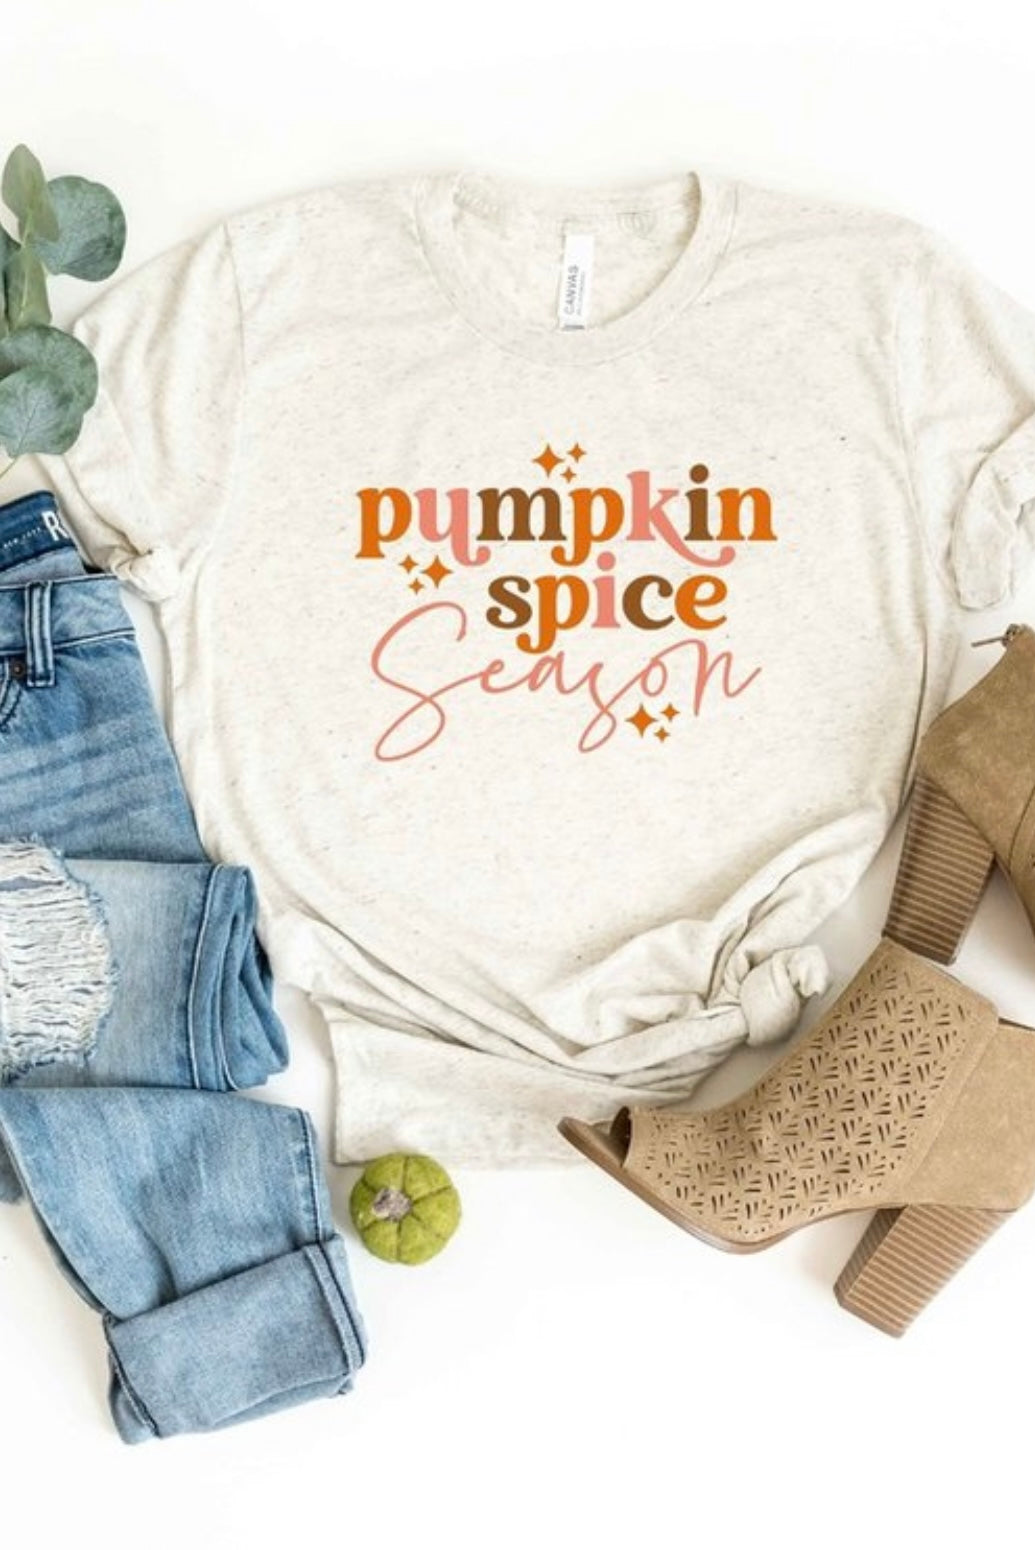 Pumpkin Spice Graphic Tee - Corinne Boutique Family Owned and Operated USA